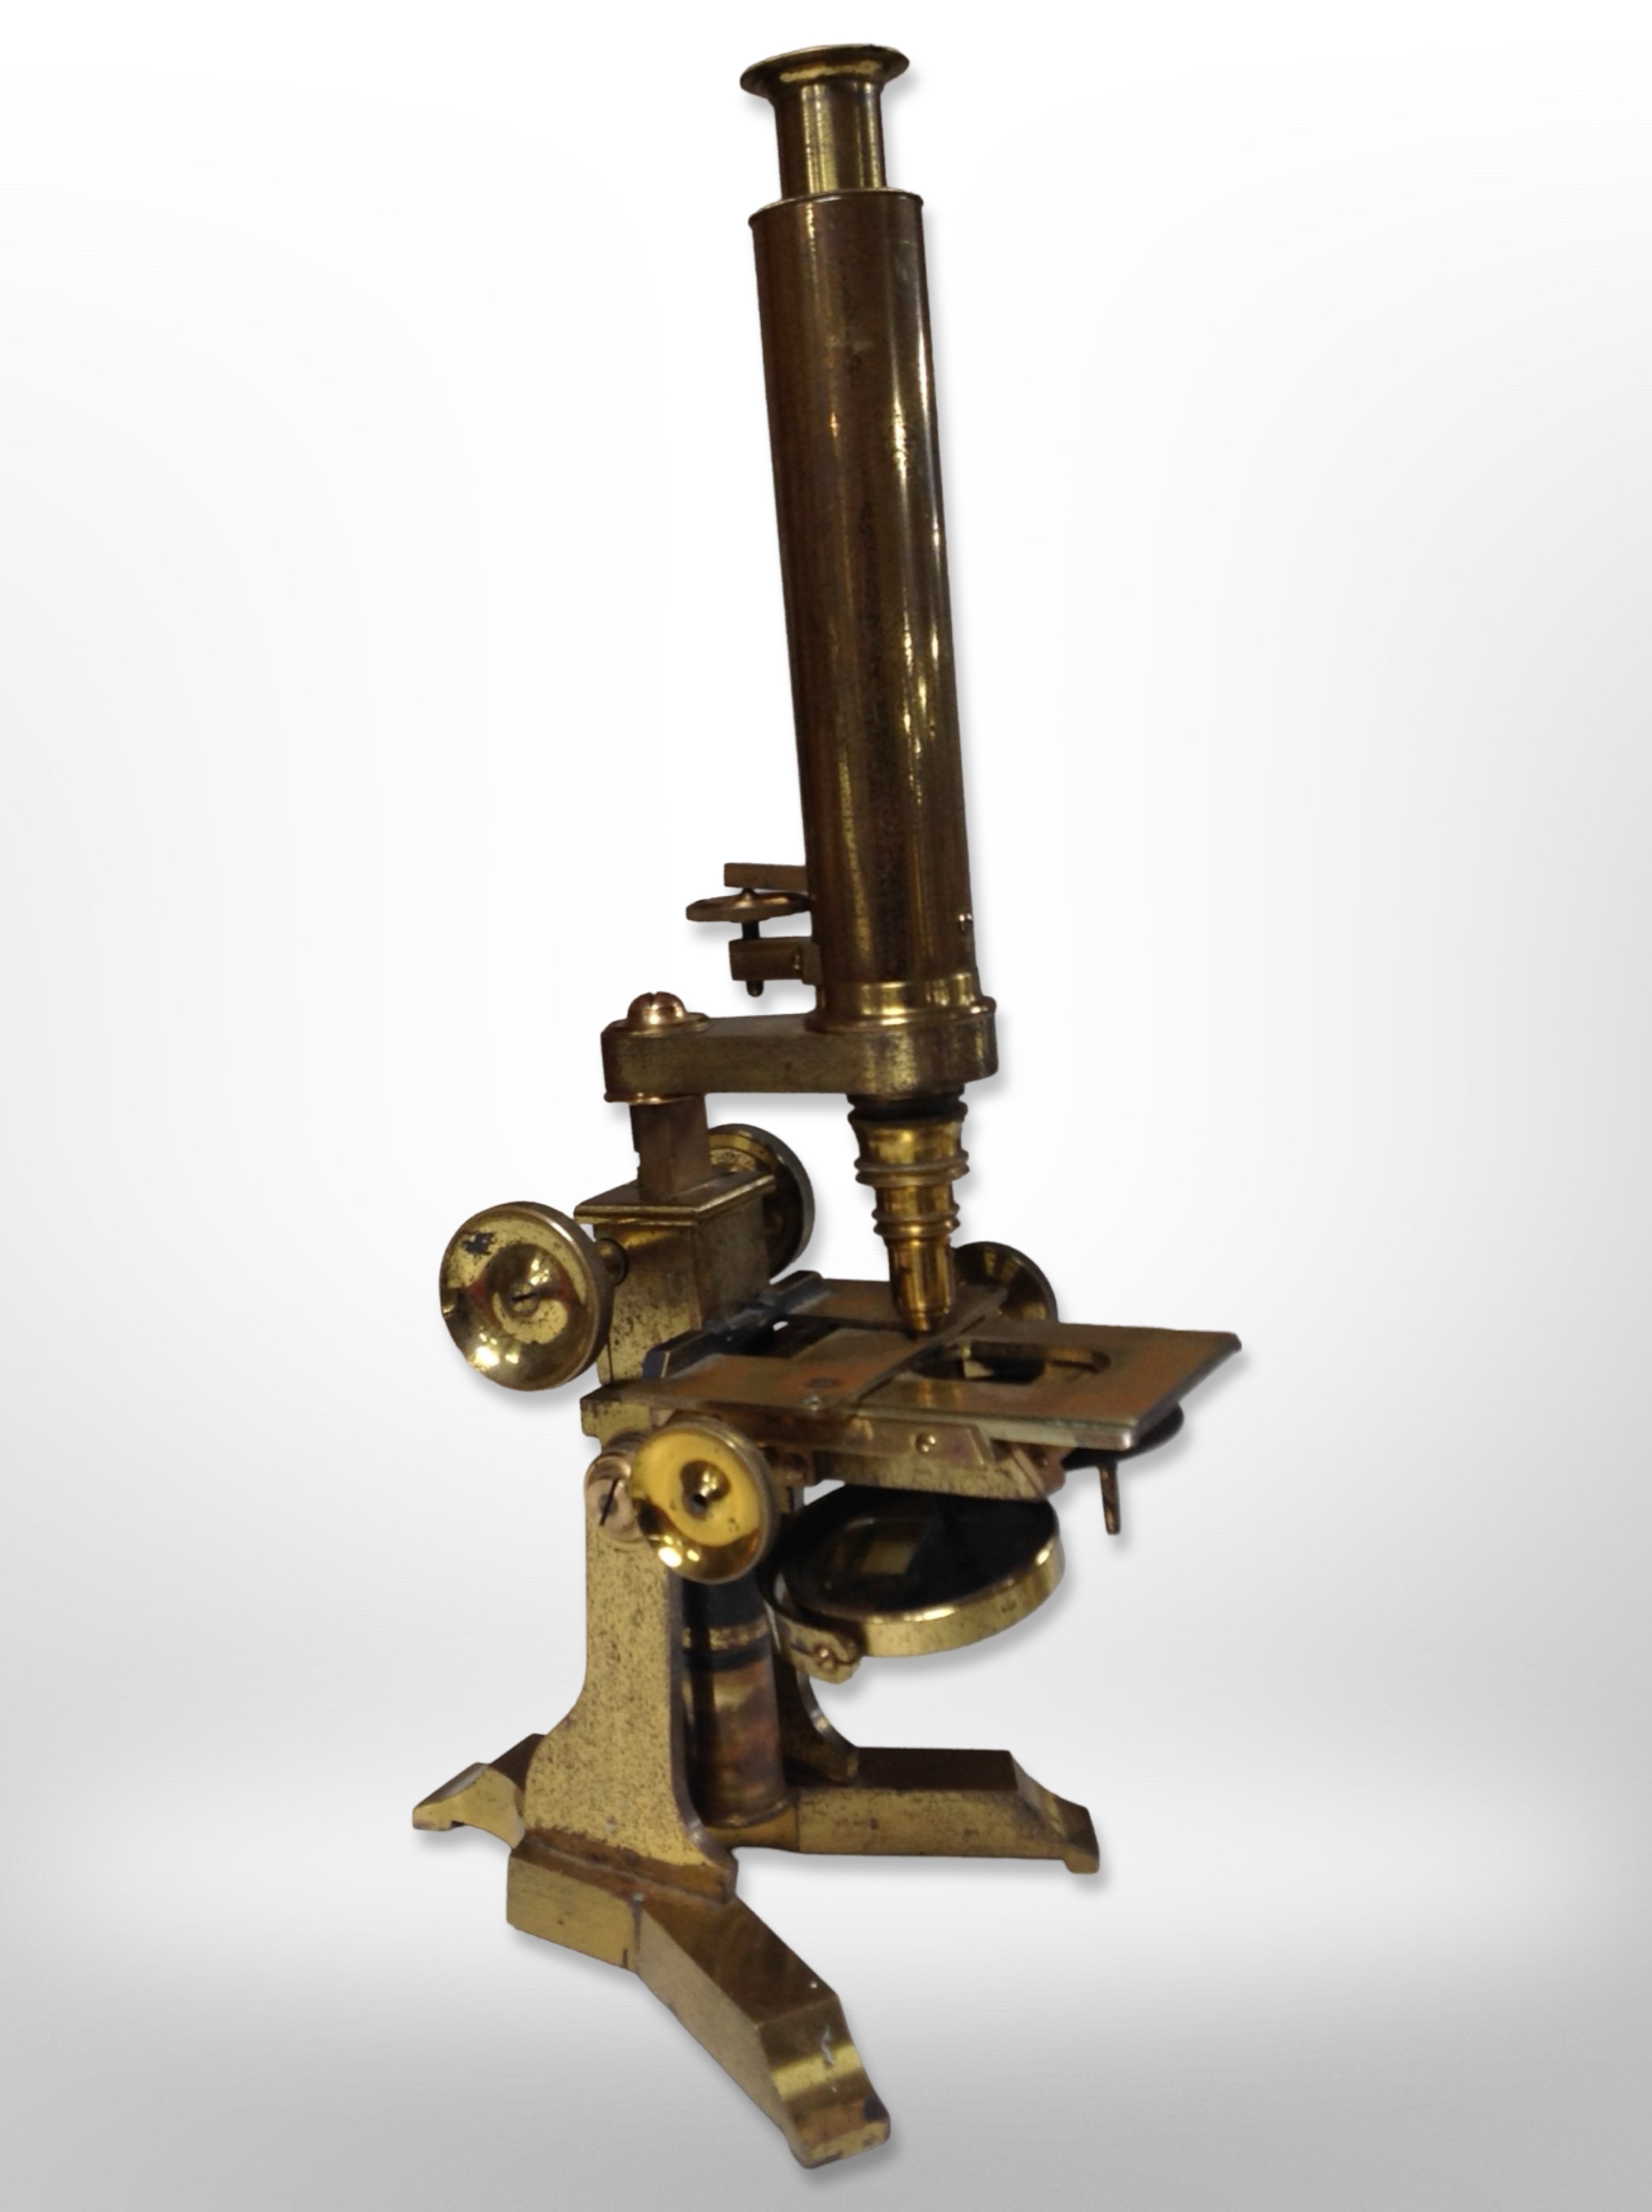 An early 20th century lacquered brass microscope by J.